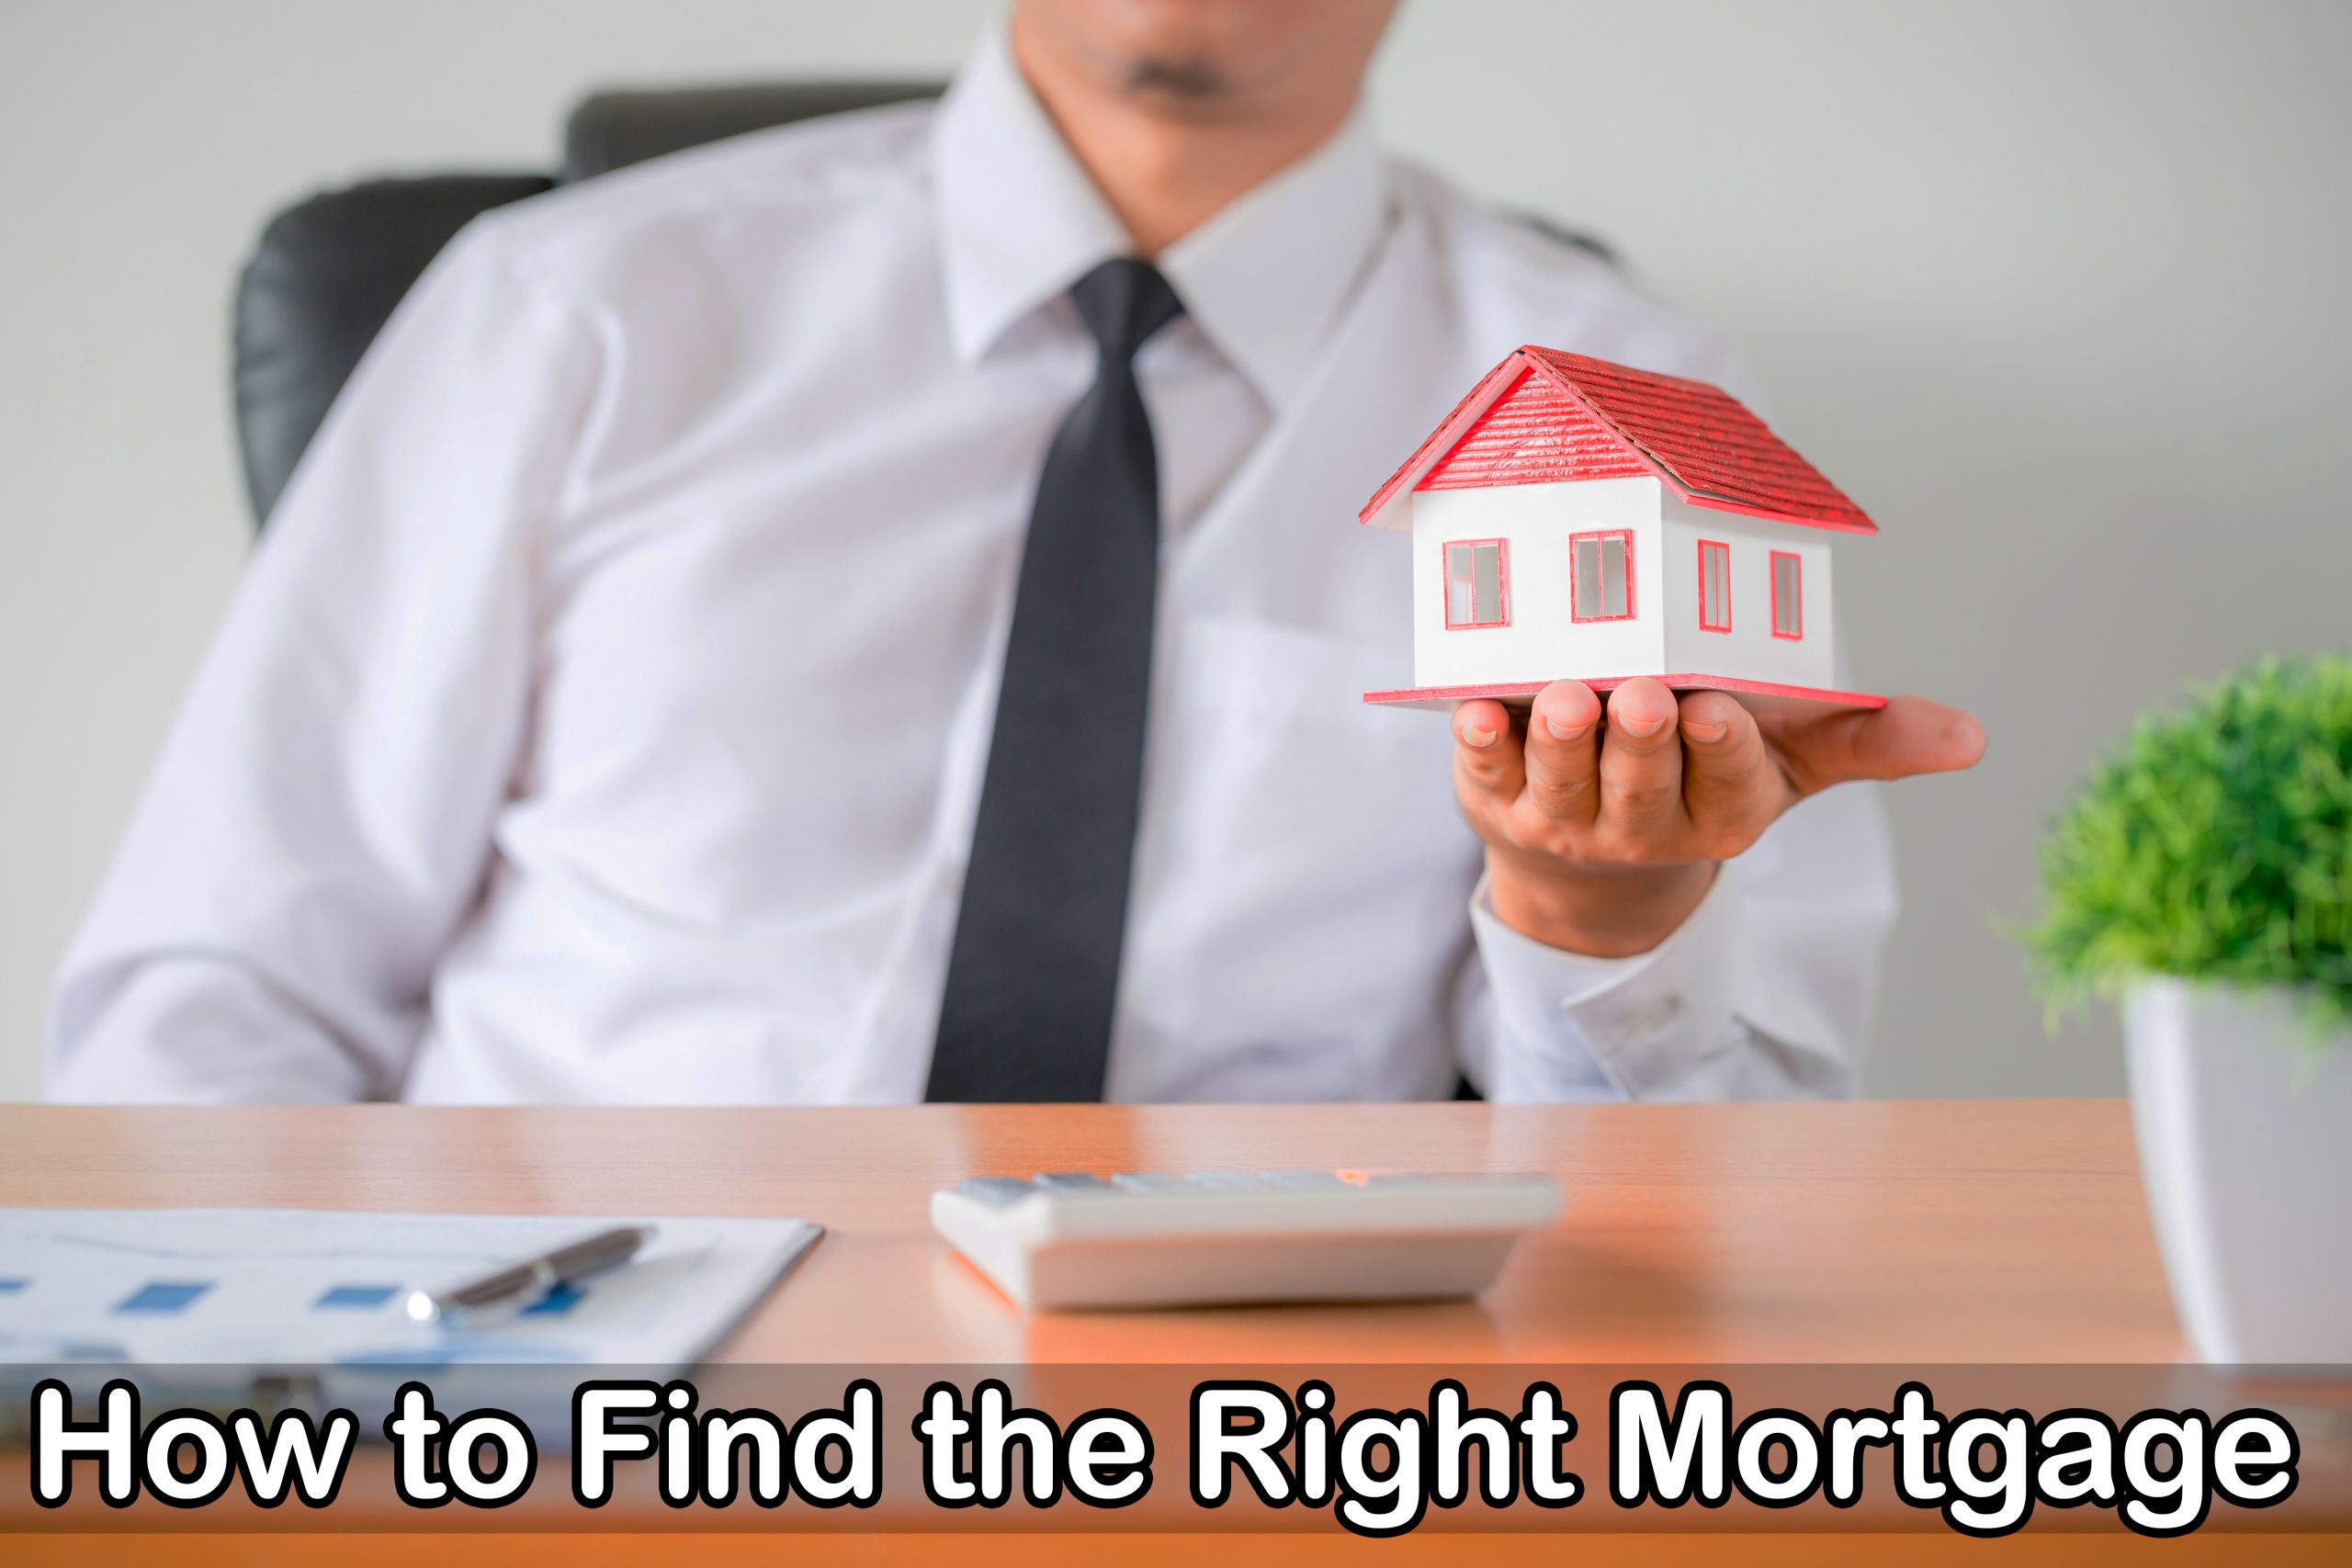 How to Find the Right Mortgage